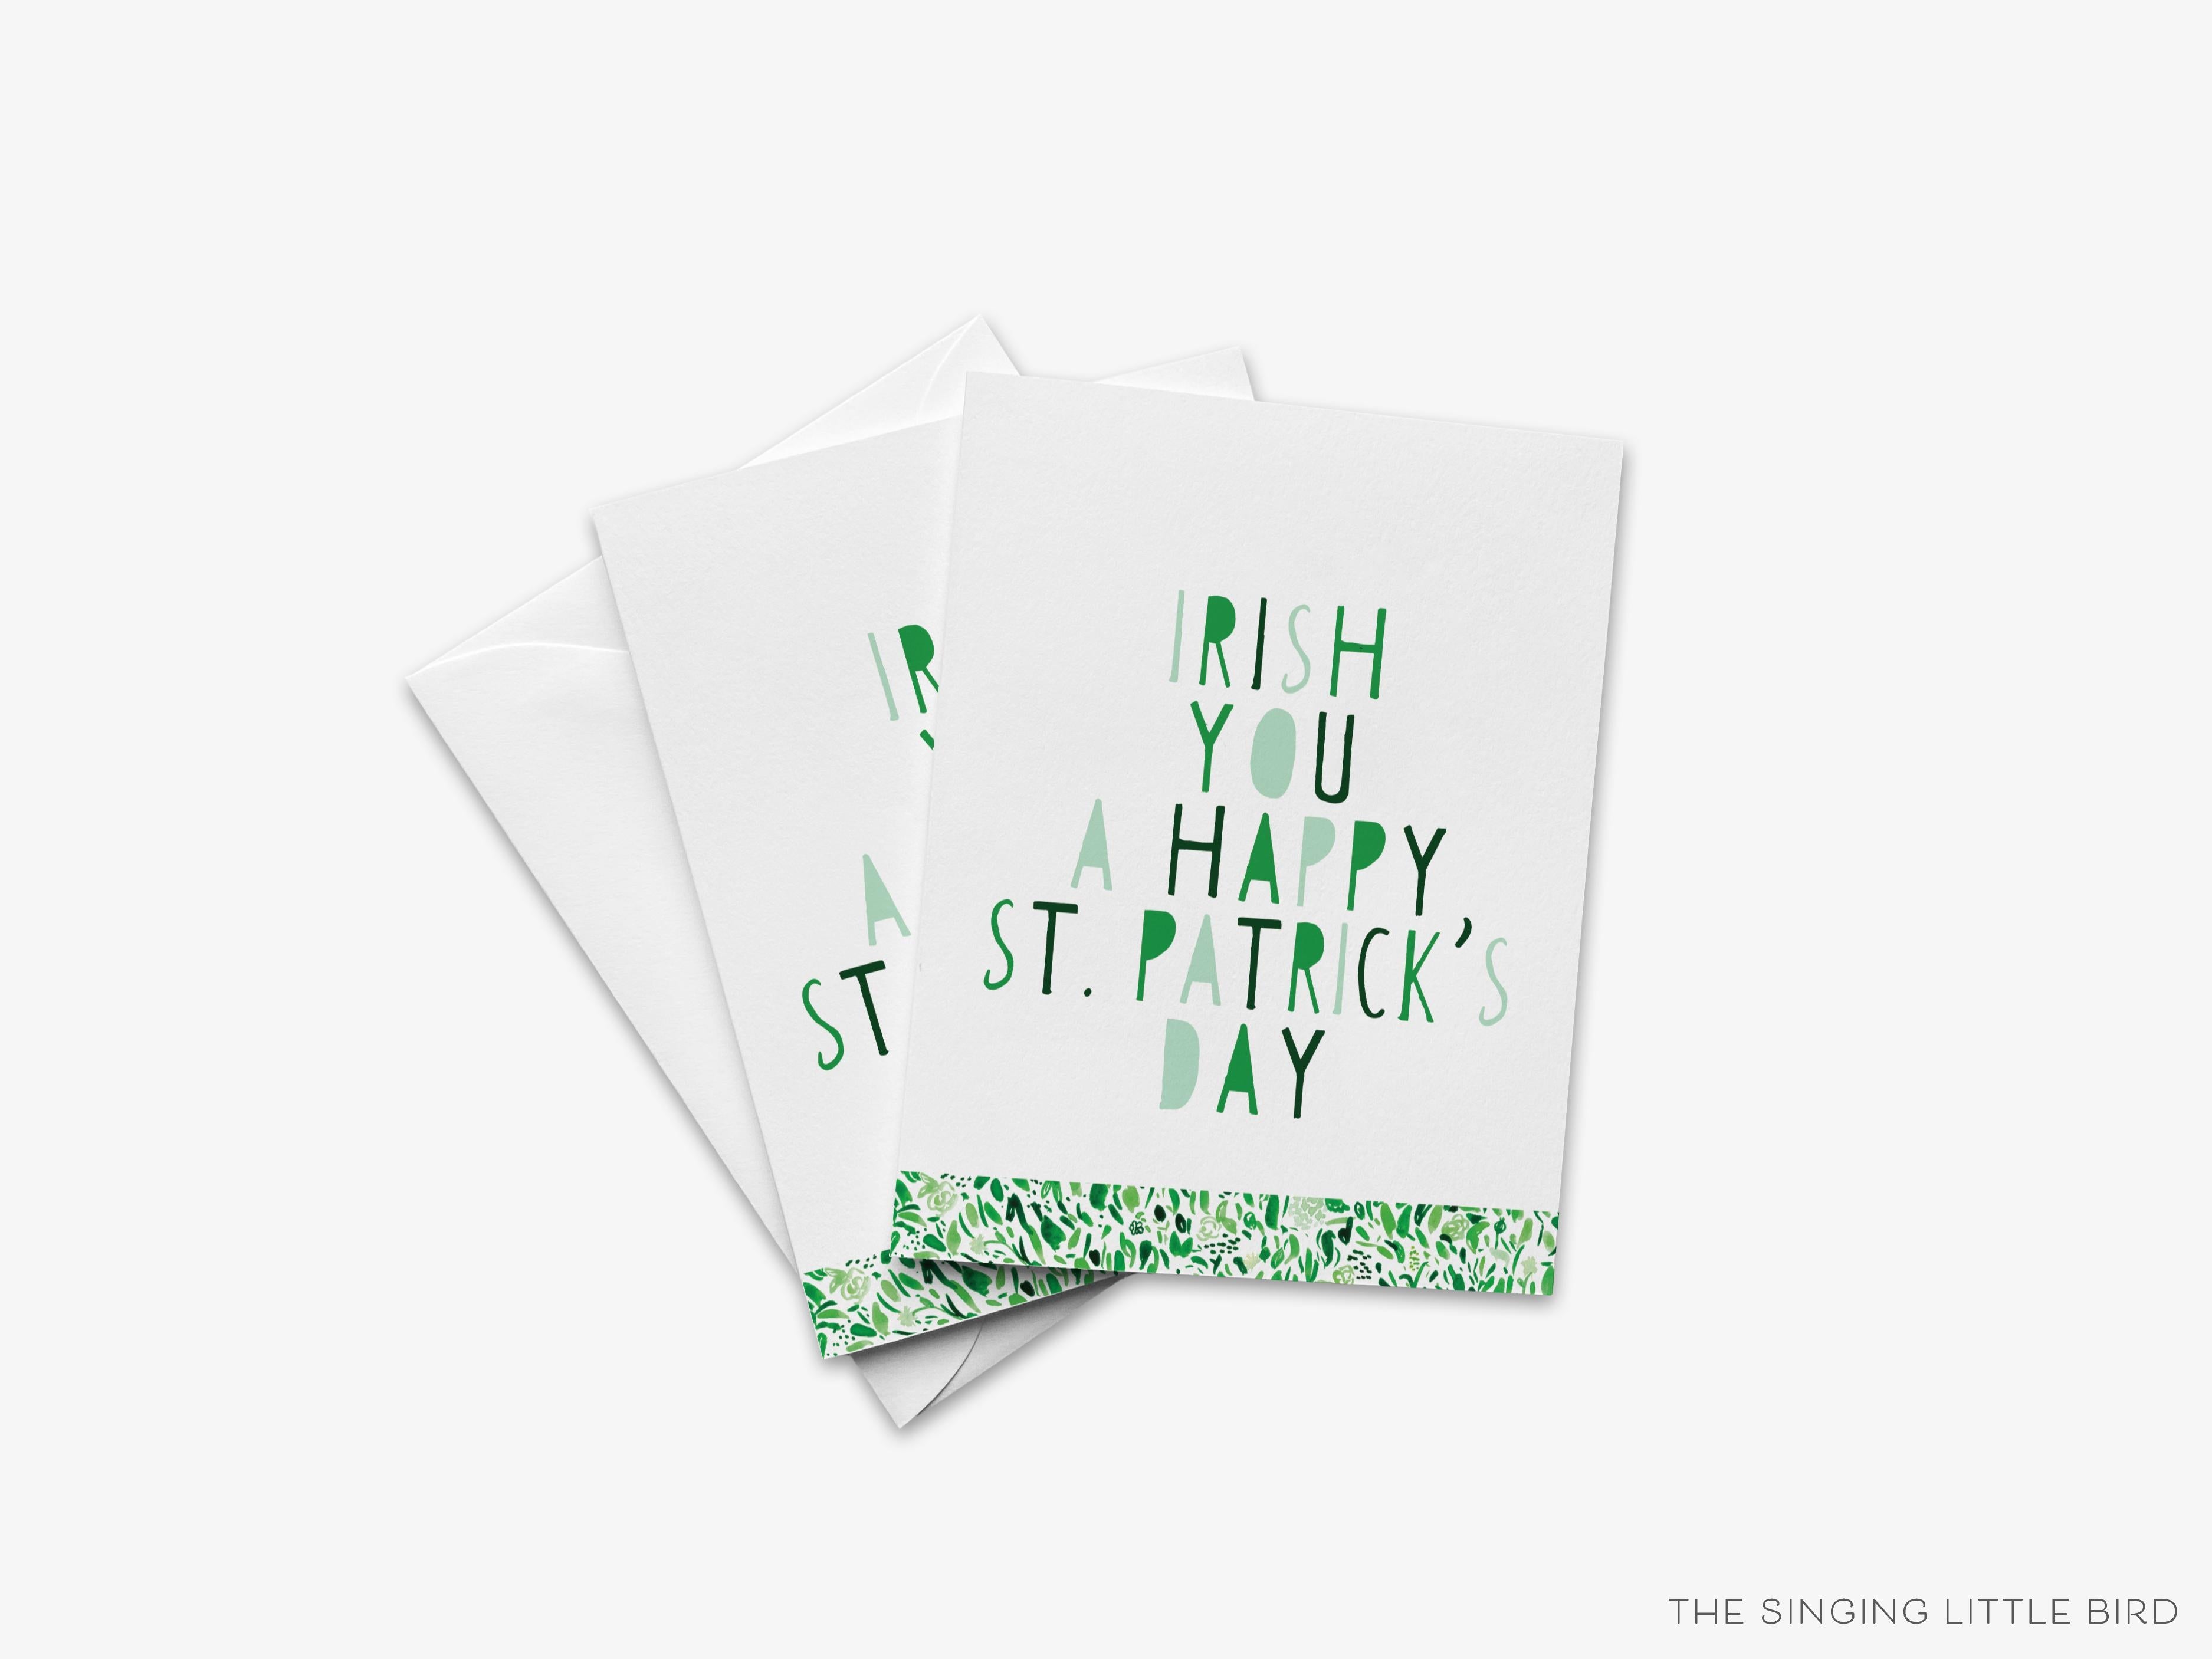 St. Patrick's Day Pun Greeting Card-These folded spring cards are 4.25x5.5 and feature our hand-painted watercolor green pattern and print, printed in the USA on 100lb textured stock. They come with a White envelope and make a lovely card to say a punny Happy St. Patrick's Day with to your family and friends. -The Singing Little Bird